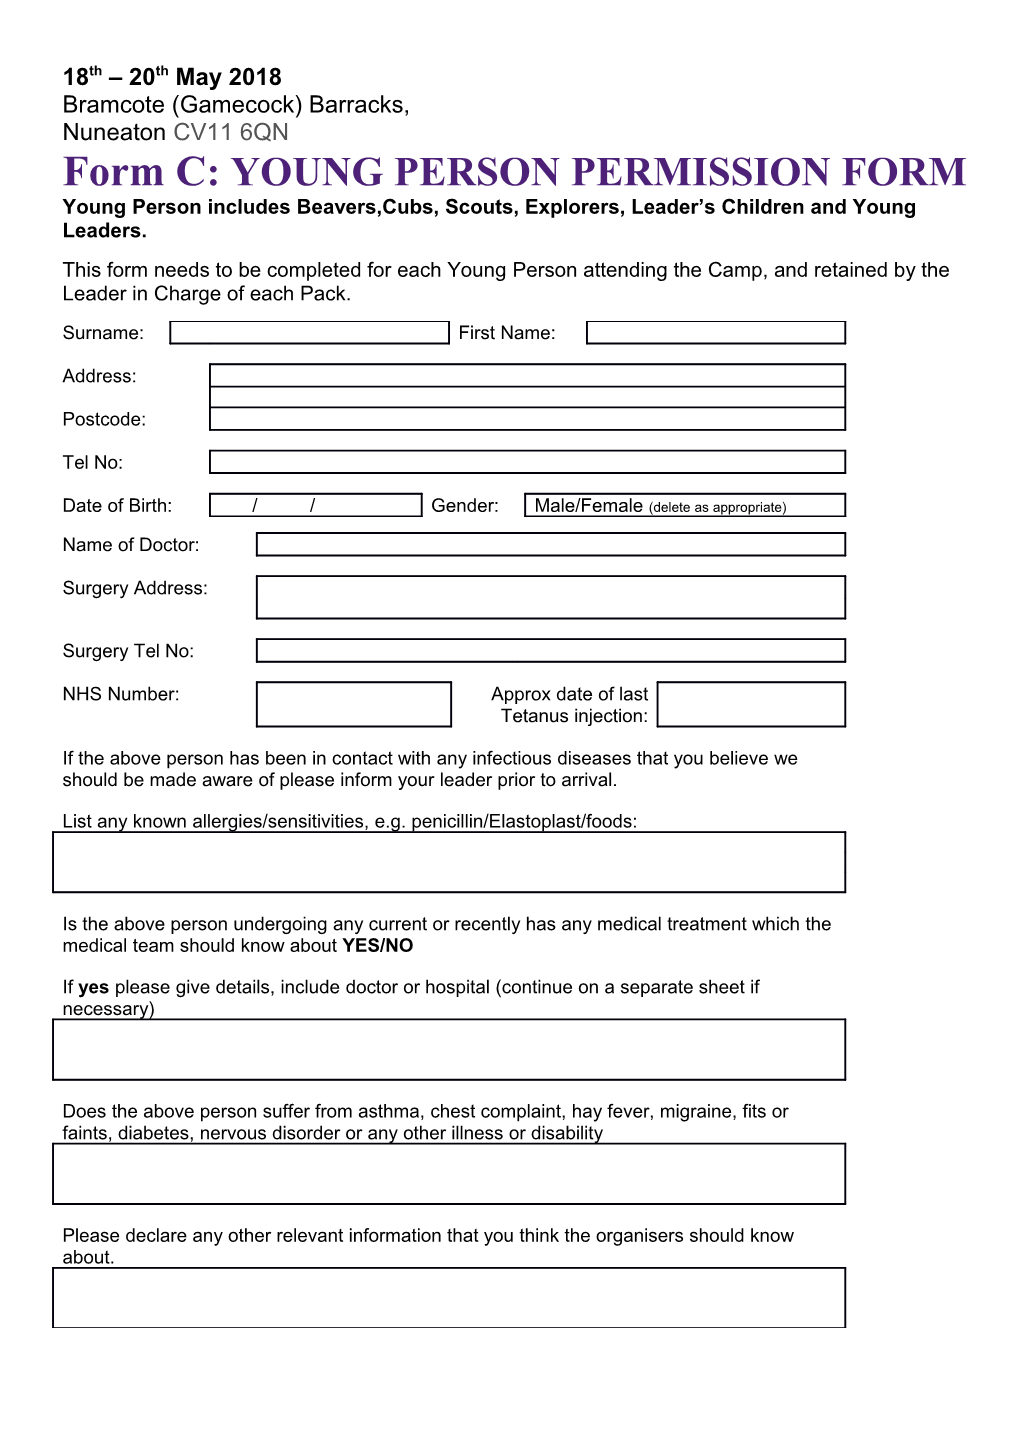 Form C: YOUNG PERSON PERMISSION FORM